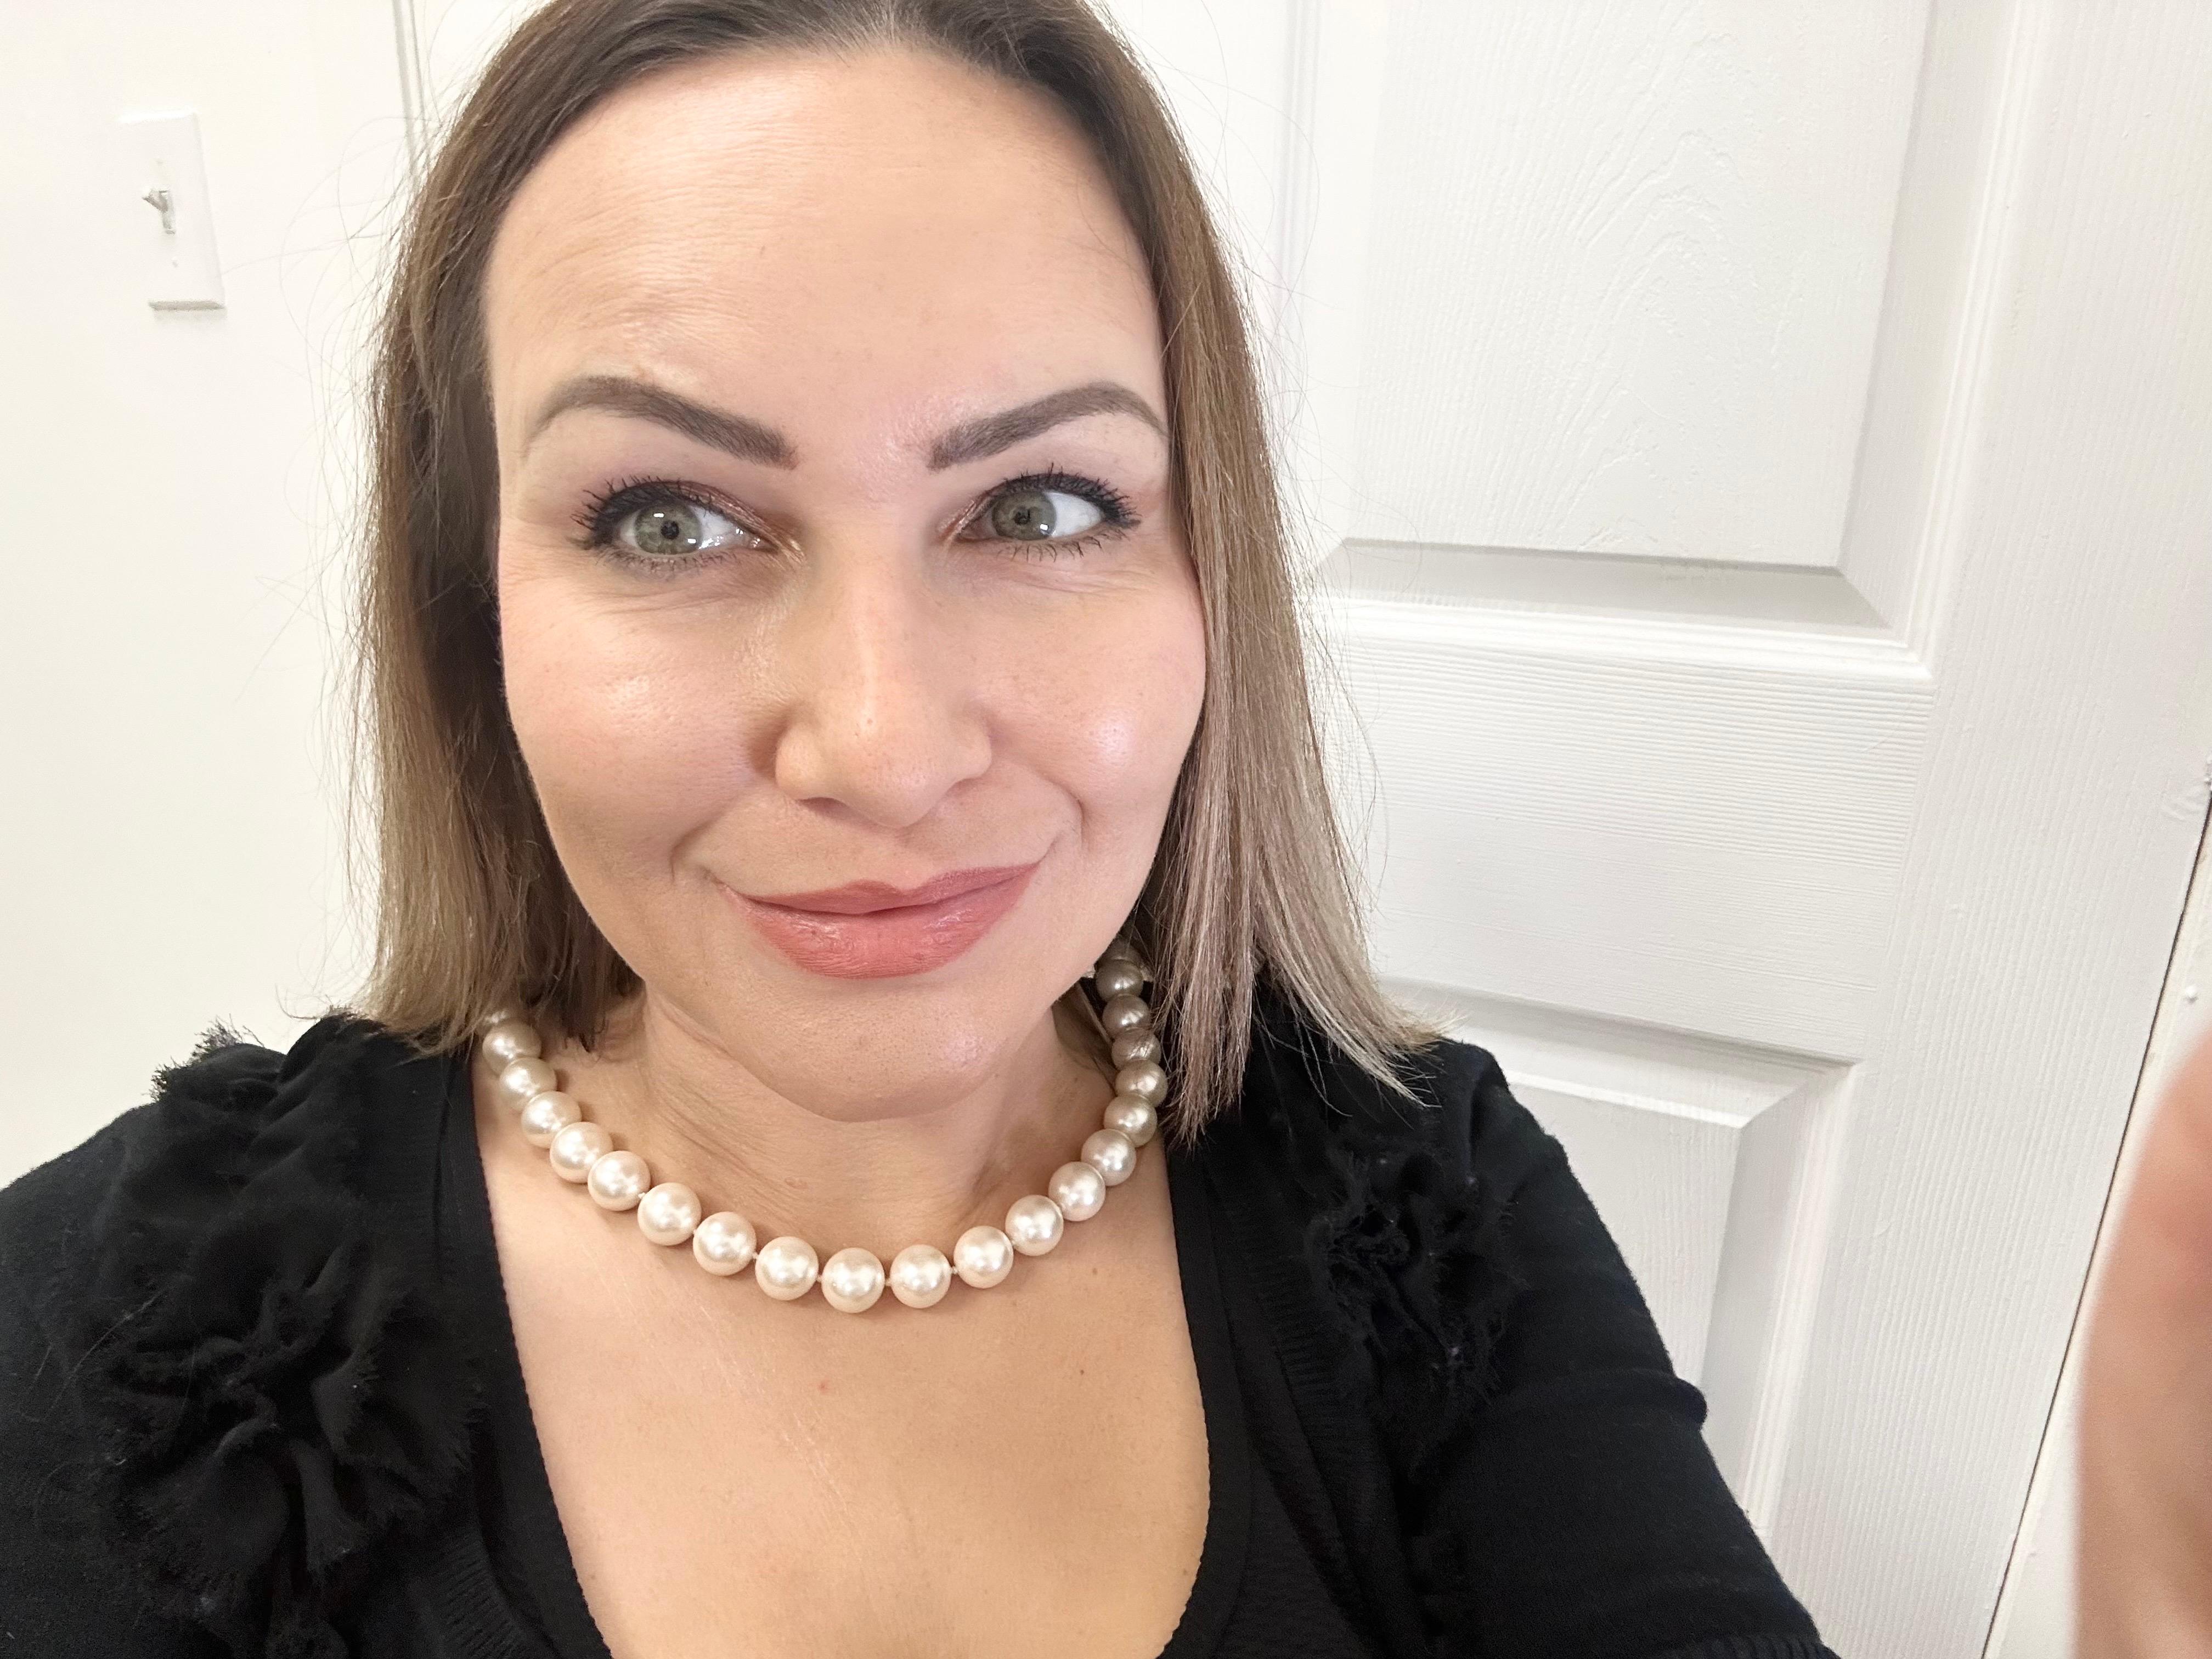 Beautiful shell pearl necklace with a gold clasp 14KT, the pearl necklace is 18 inches and the pearls are 14mm each, the clasp works great but has a small dent that is not very visible.

ABOUT US
We are a family-owned business. Our studio in located